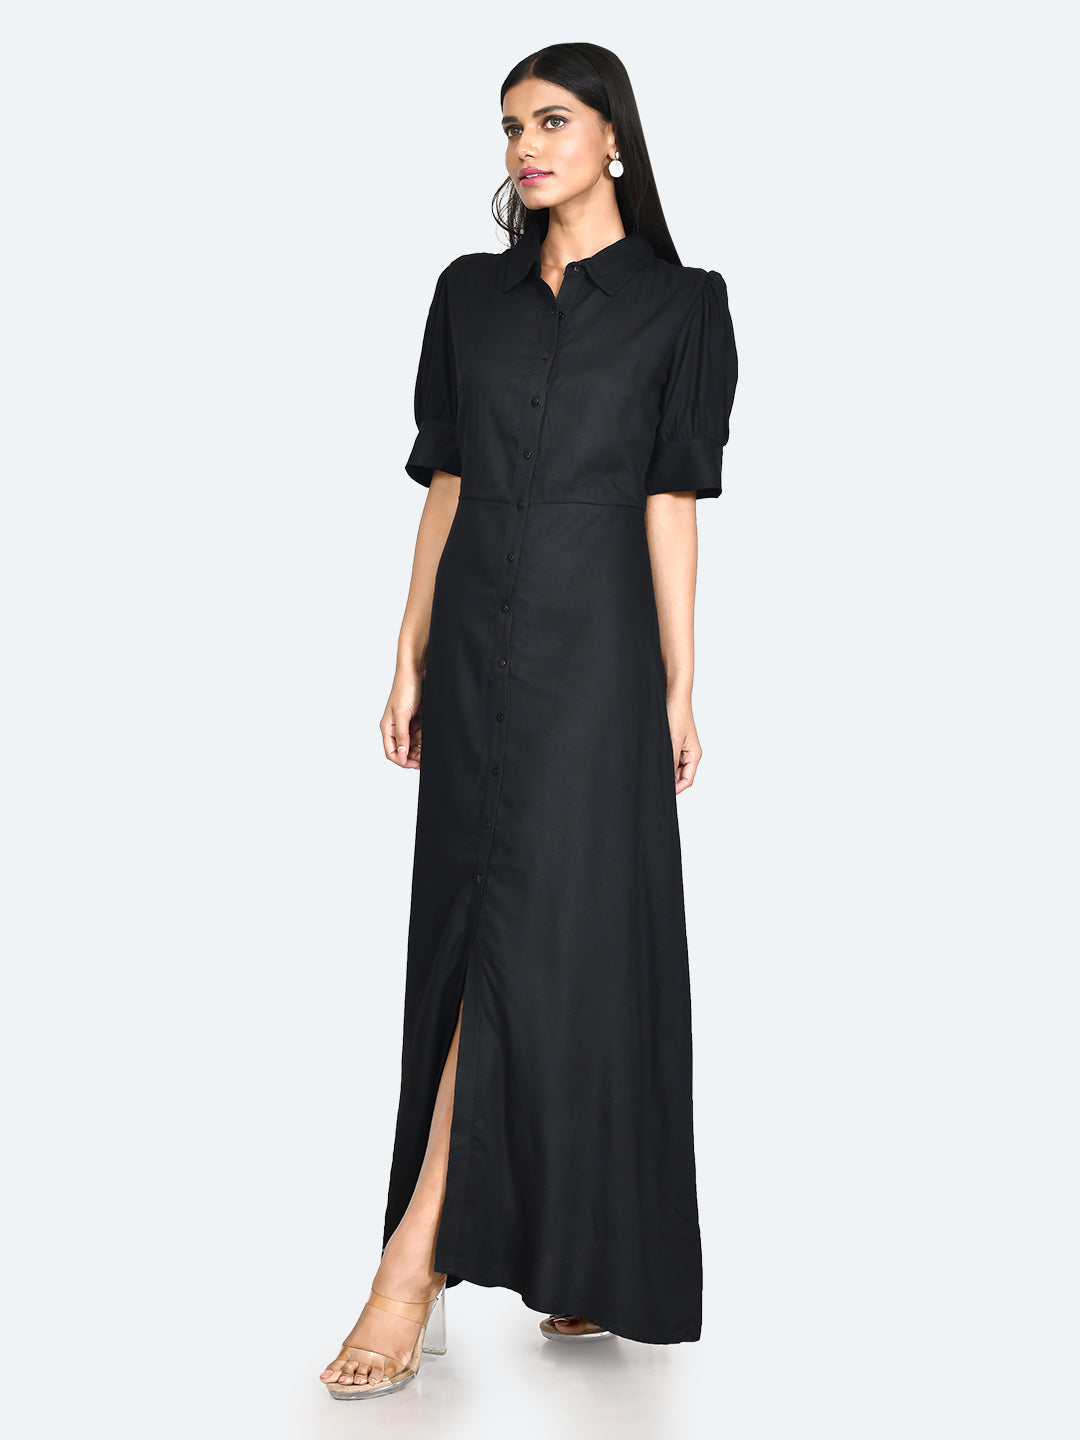 Black Solid Buttoned Maxi Dress For Women